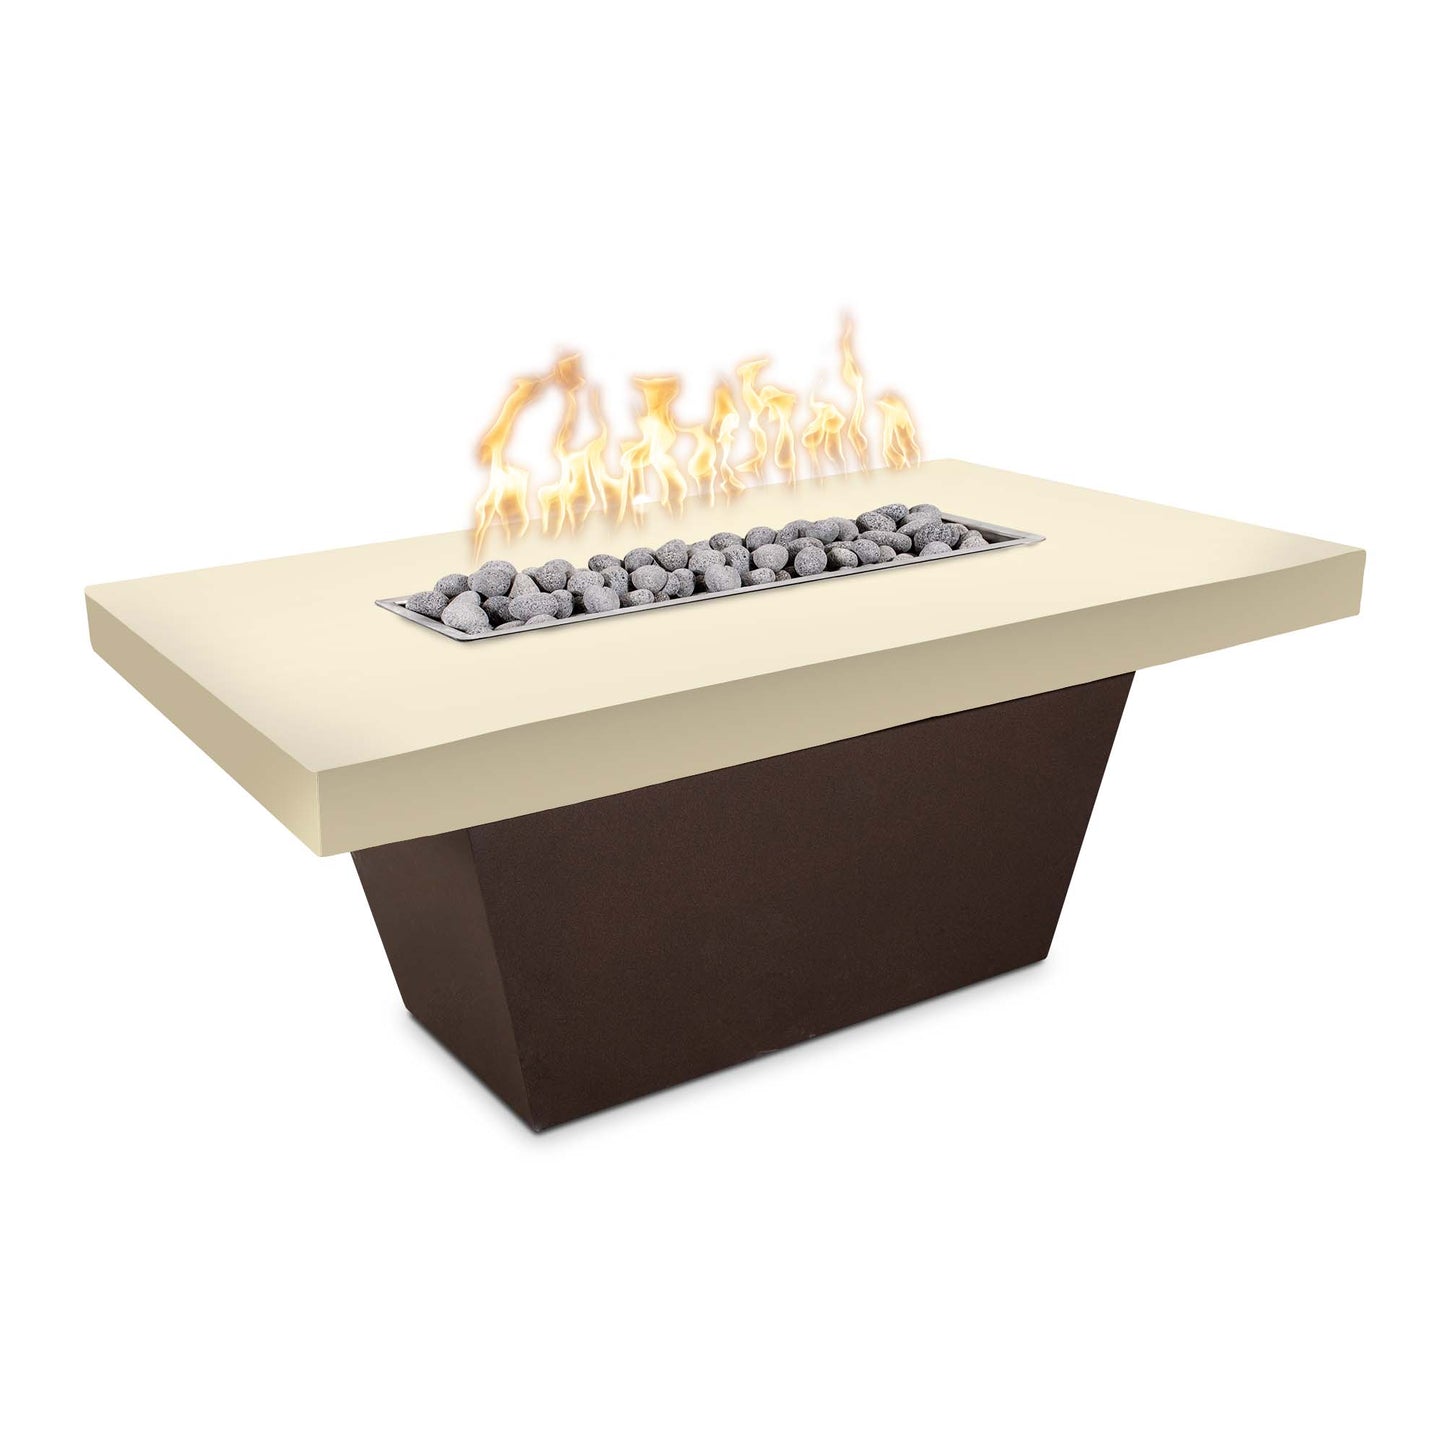 The Outdoor Plus Tacoma 48" Brown Concrete Top & Black Powder Coated Base Natural Gas Fire Table with Match Lit Ignition